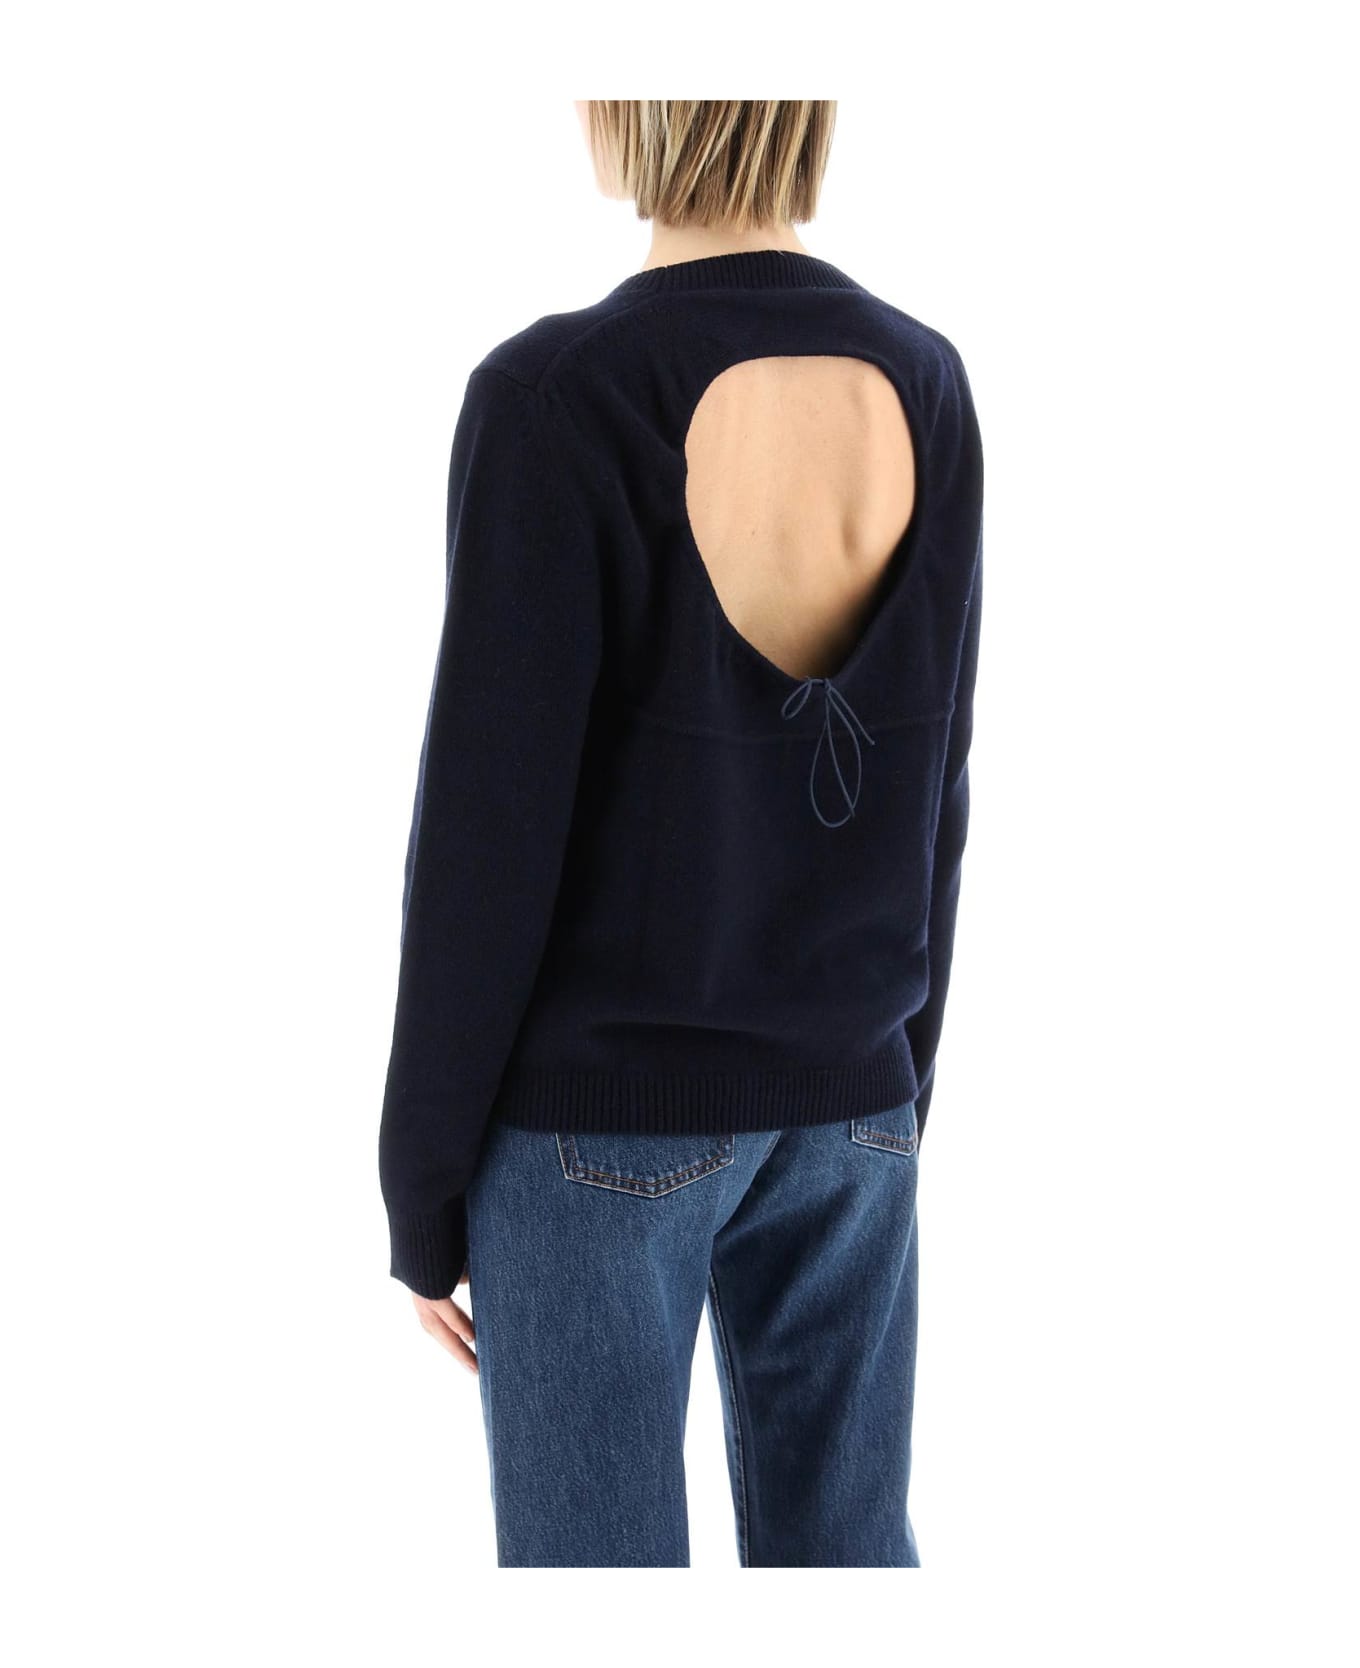 Cecilie Bahnsen 'ivory' Sweater - NAVY BLUE (Blue)